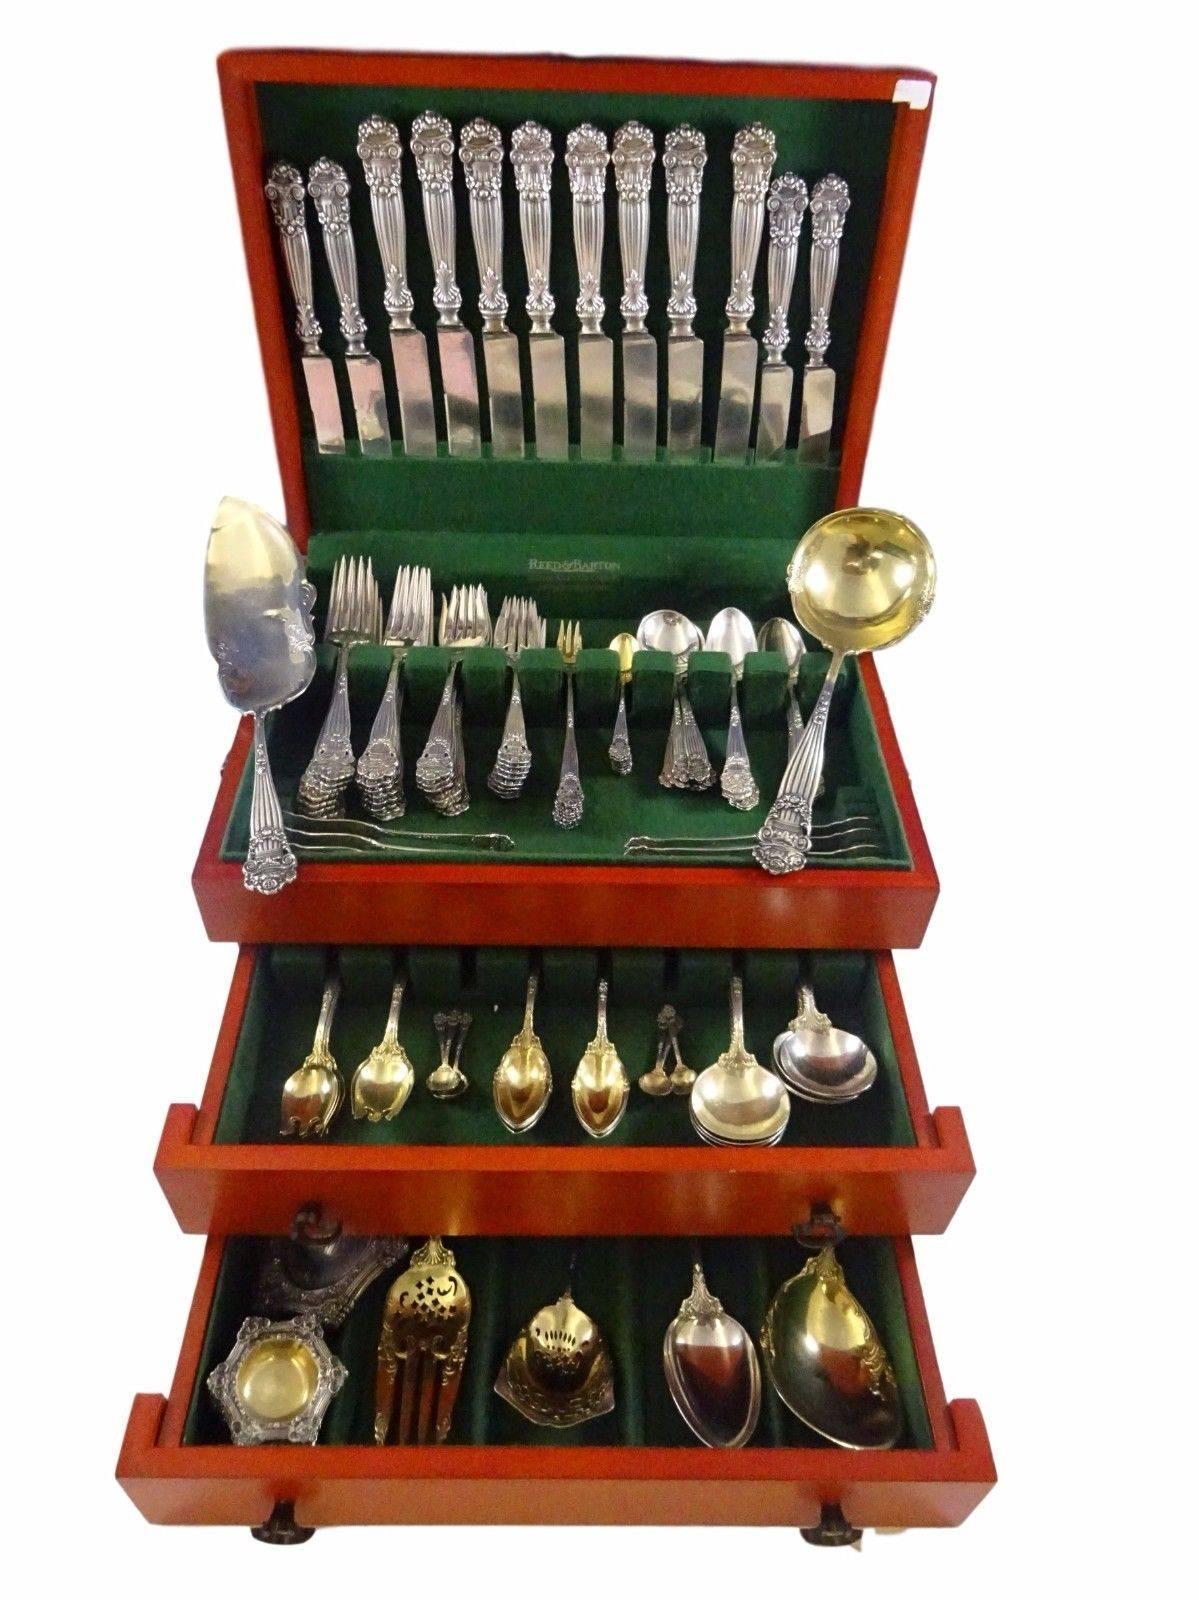 Huge Georgian by Towle sterling silver dinner size flatware set of 132 pieces. This set includes:

 
Eight dinner knives, 9 7/8